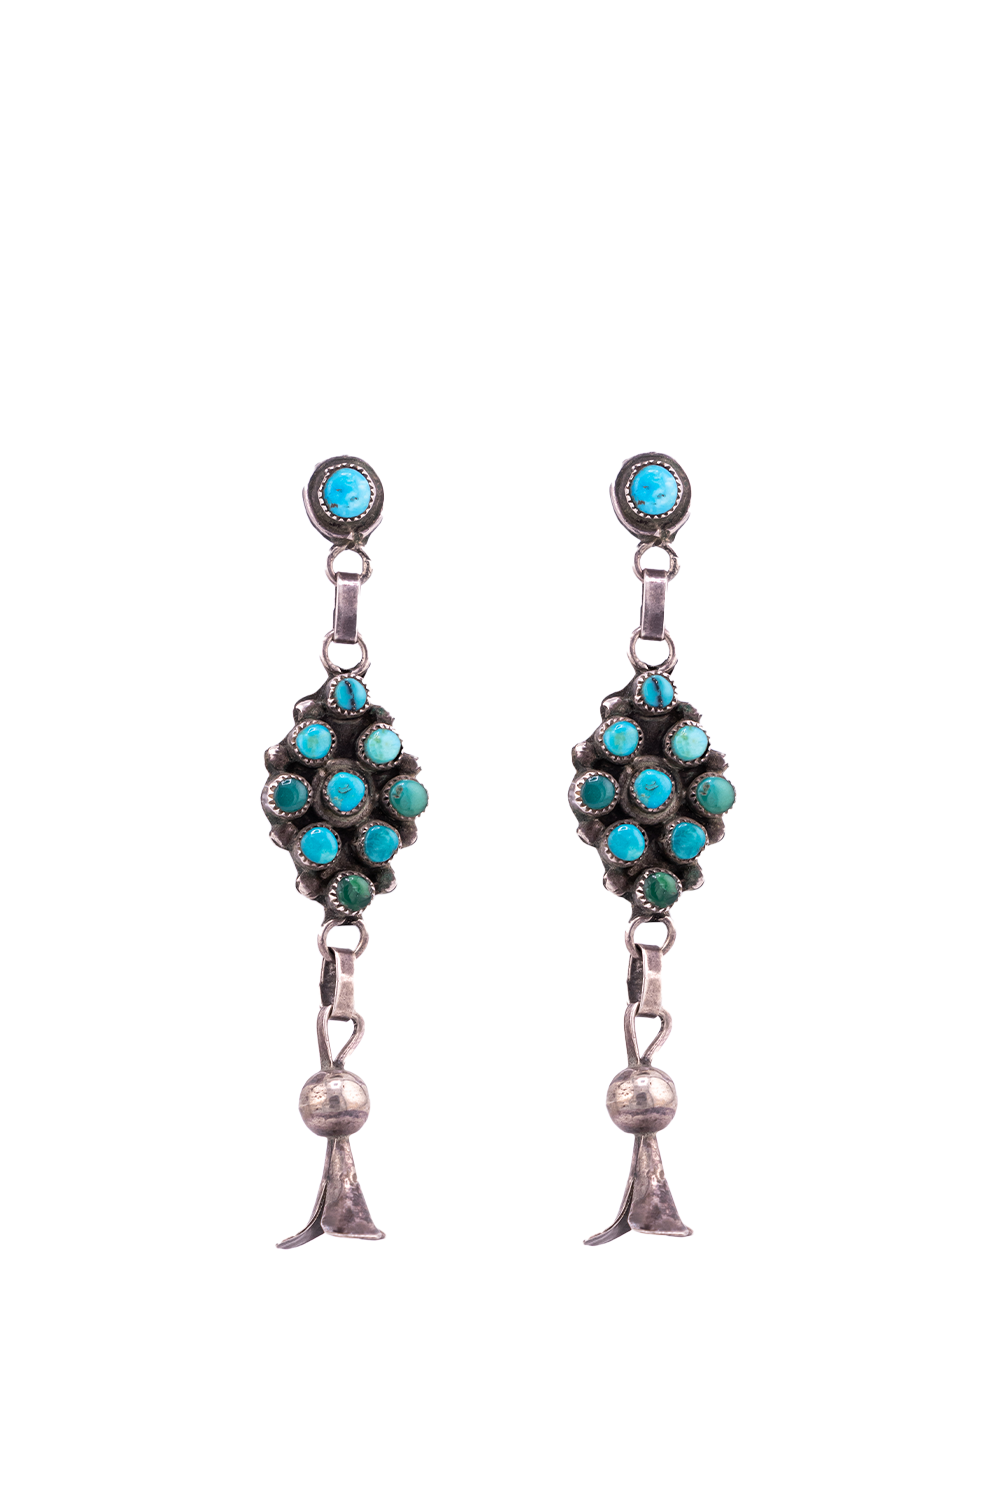 Turquoise Silver Squash Earrings